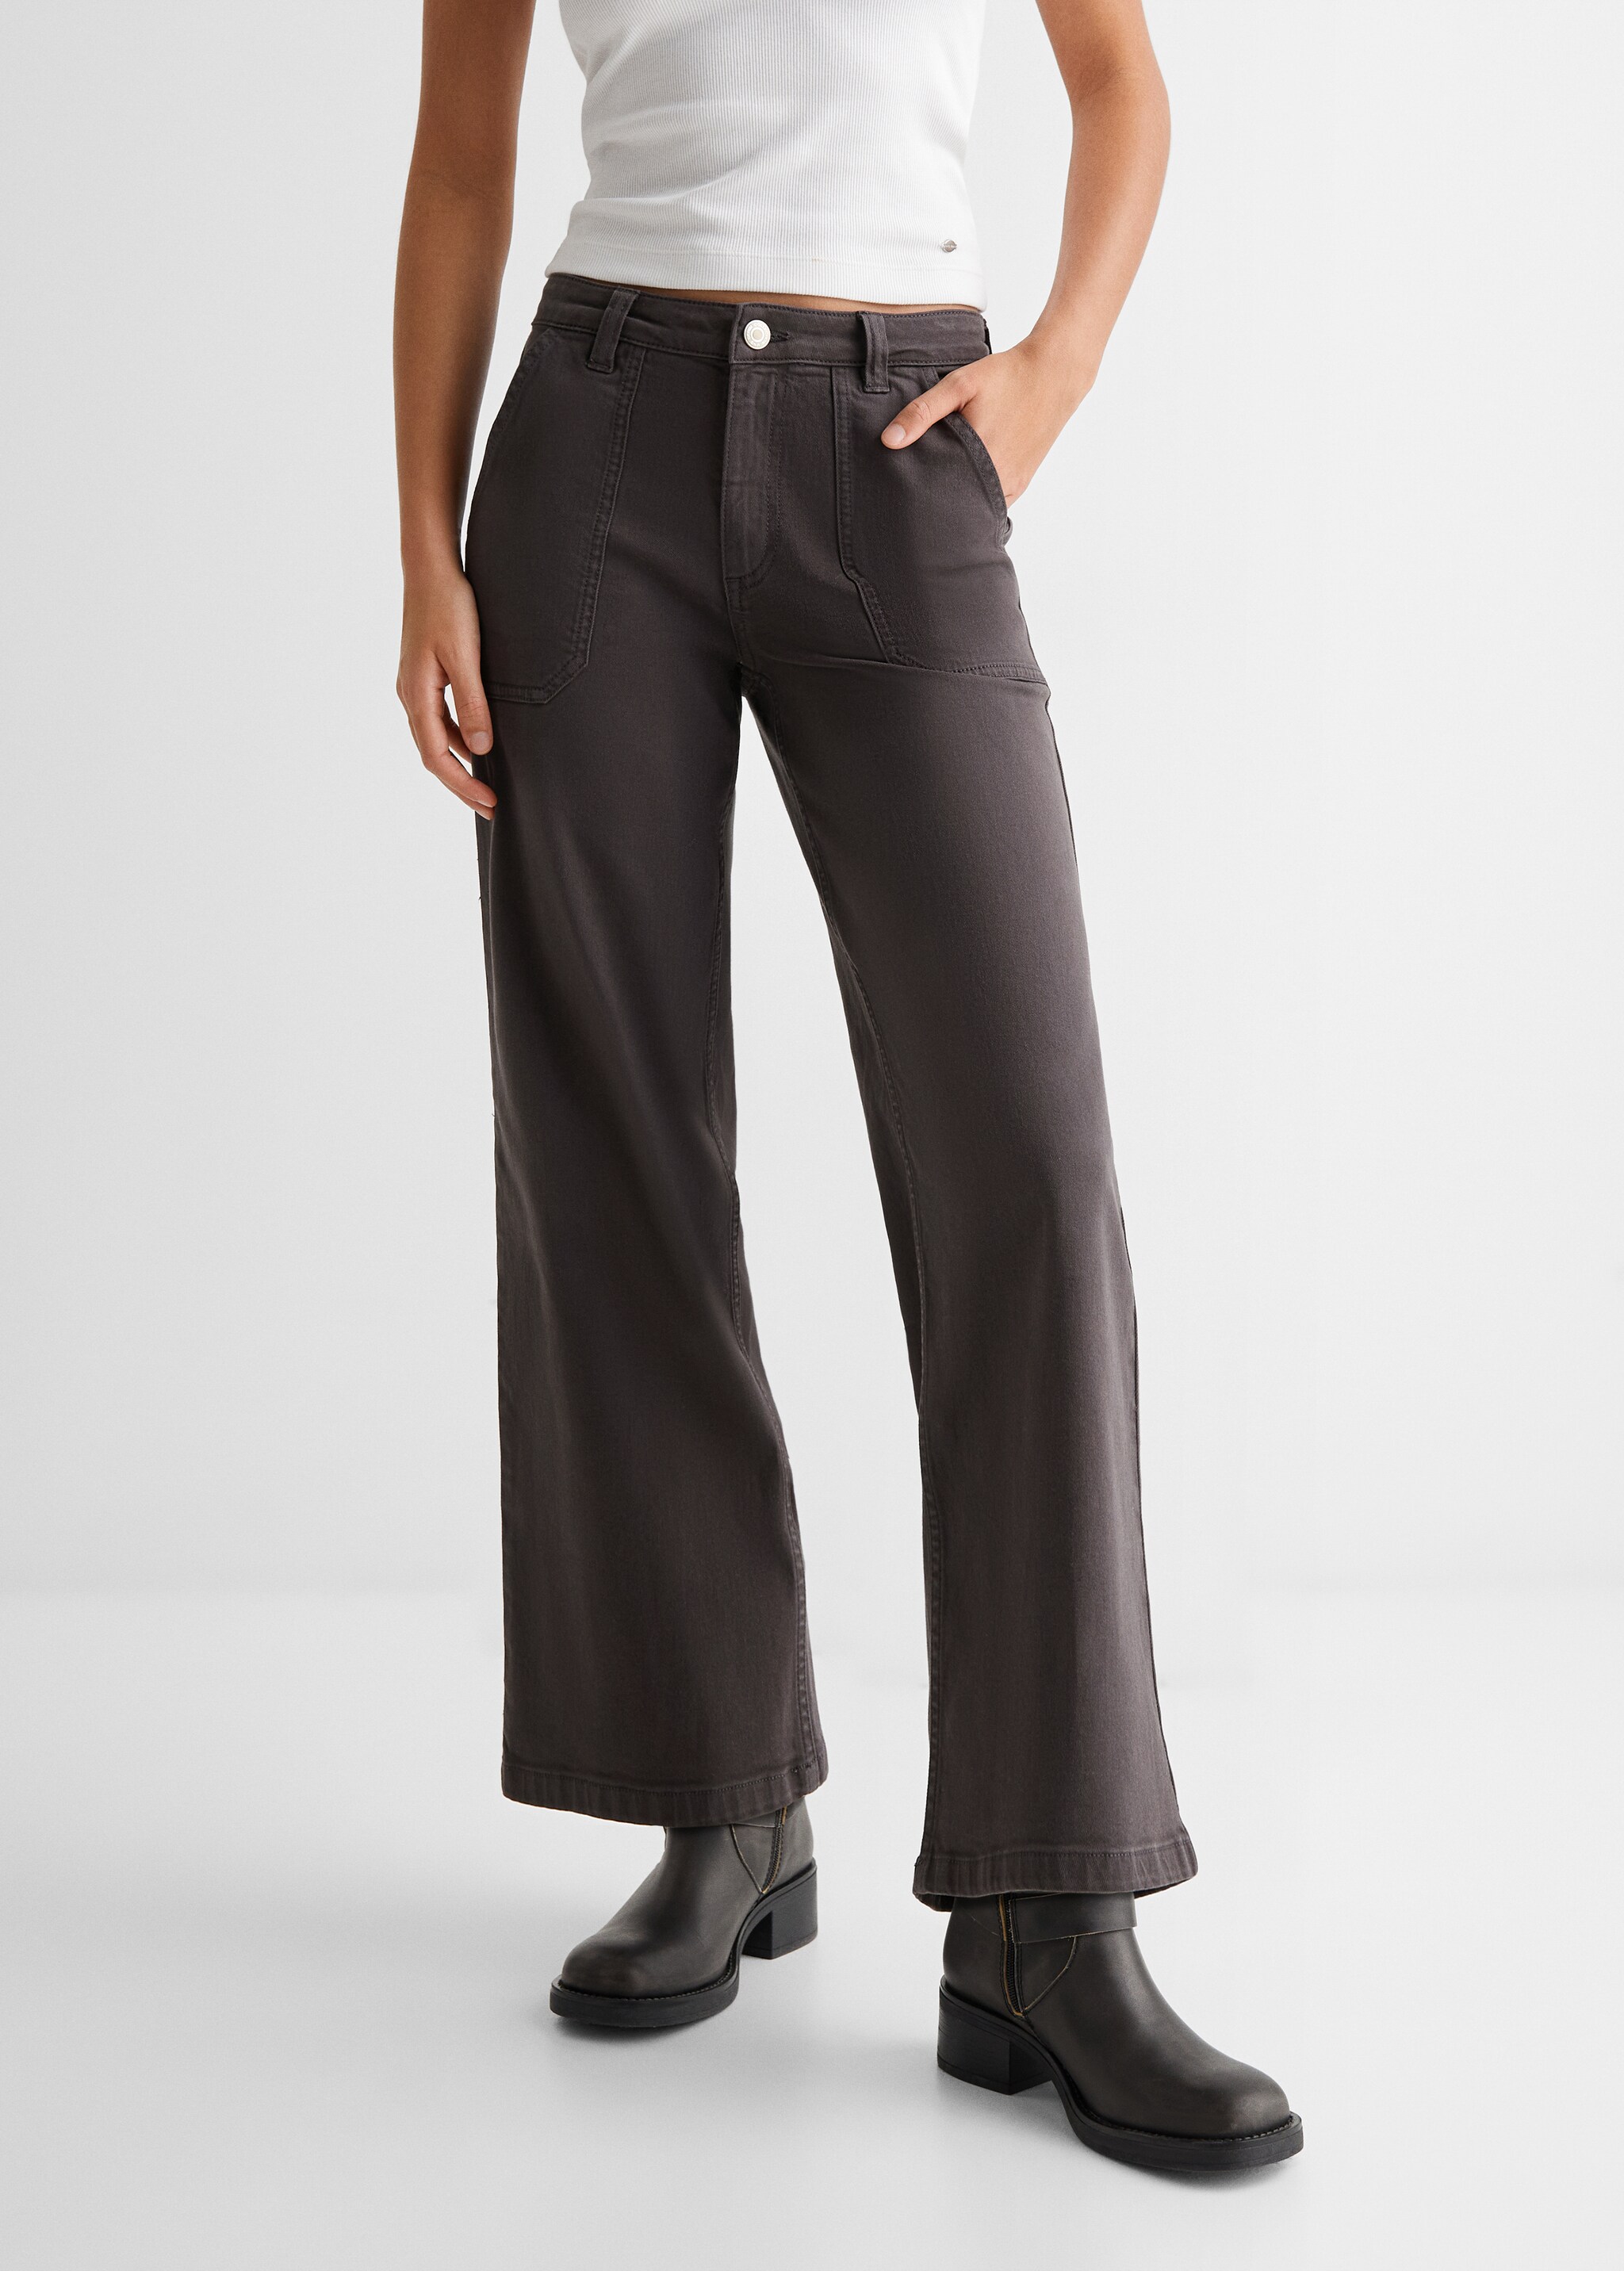 Culotte trousers with pockets - Details of the article 6